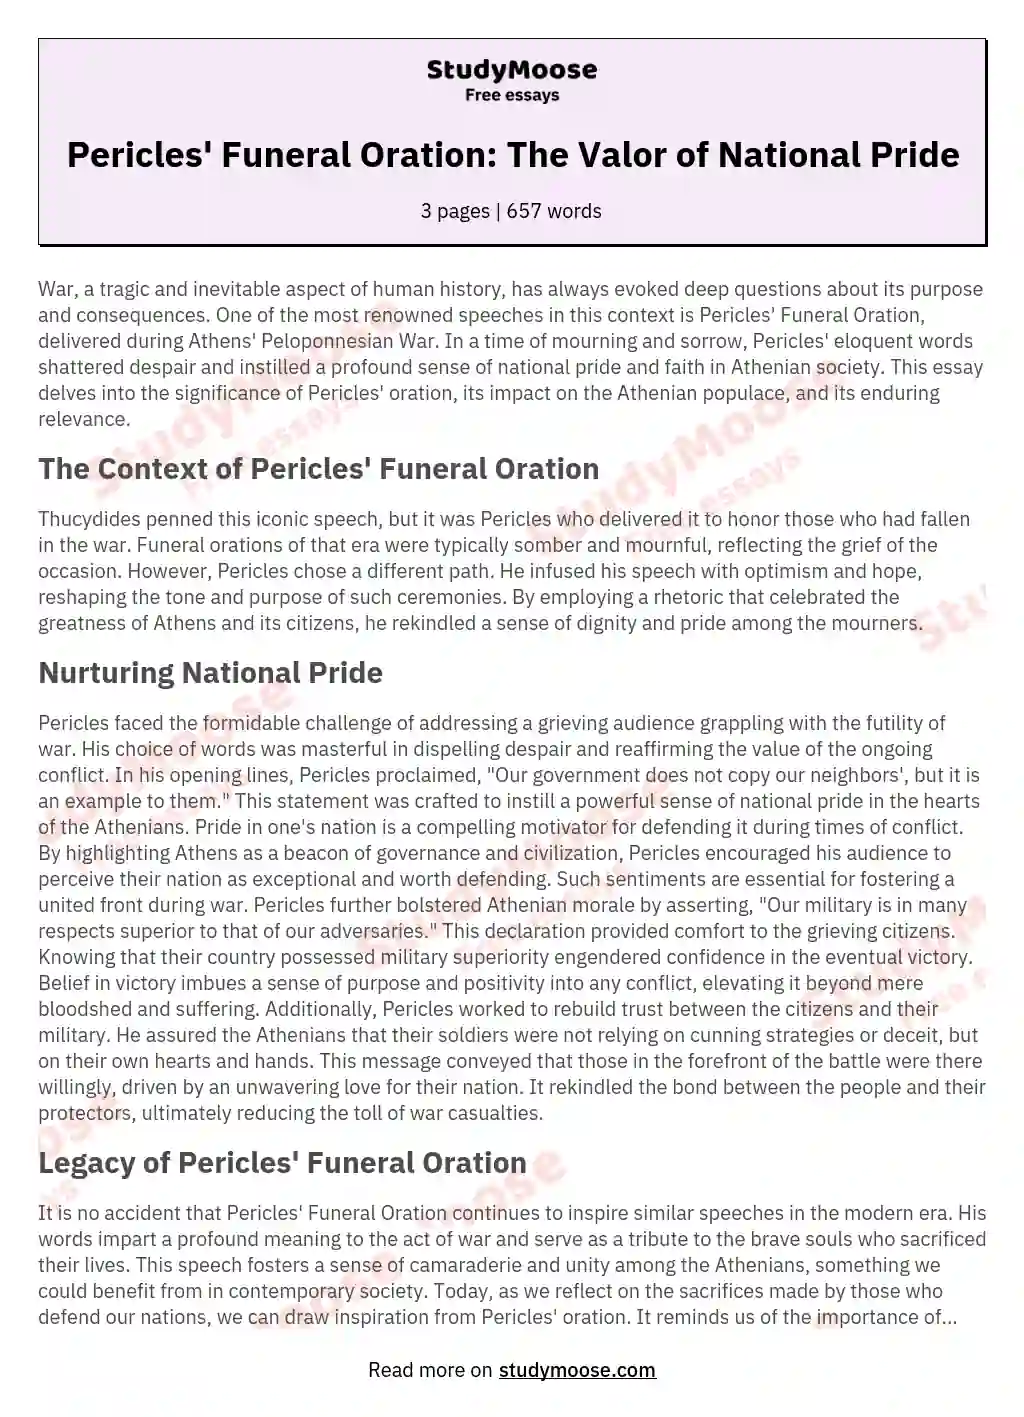 Pericles' Funeral Oration: The Valor of National Pride essay